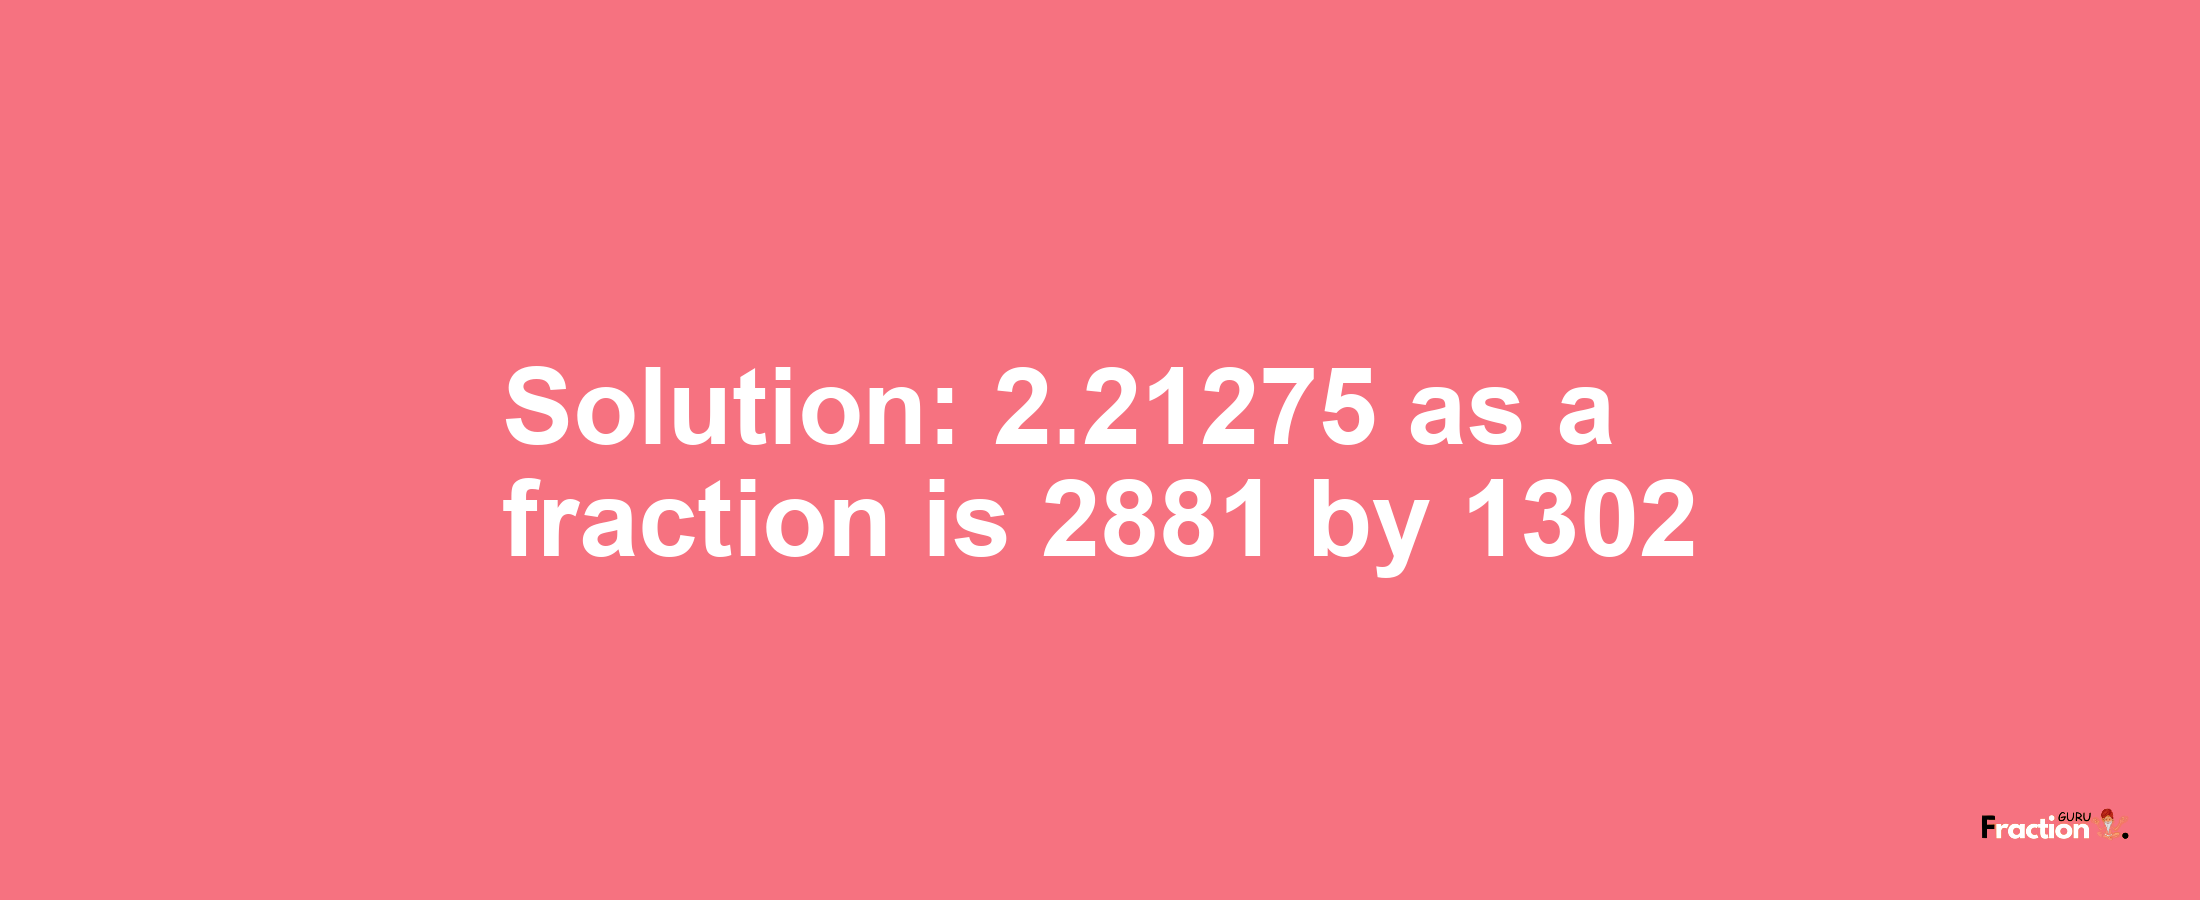 Solution:2.21275 as a fraction is 2881/1302